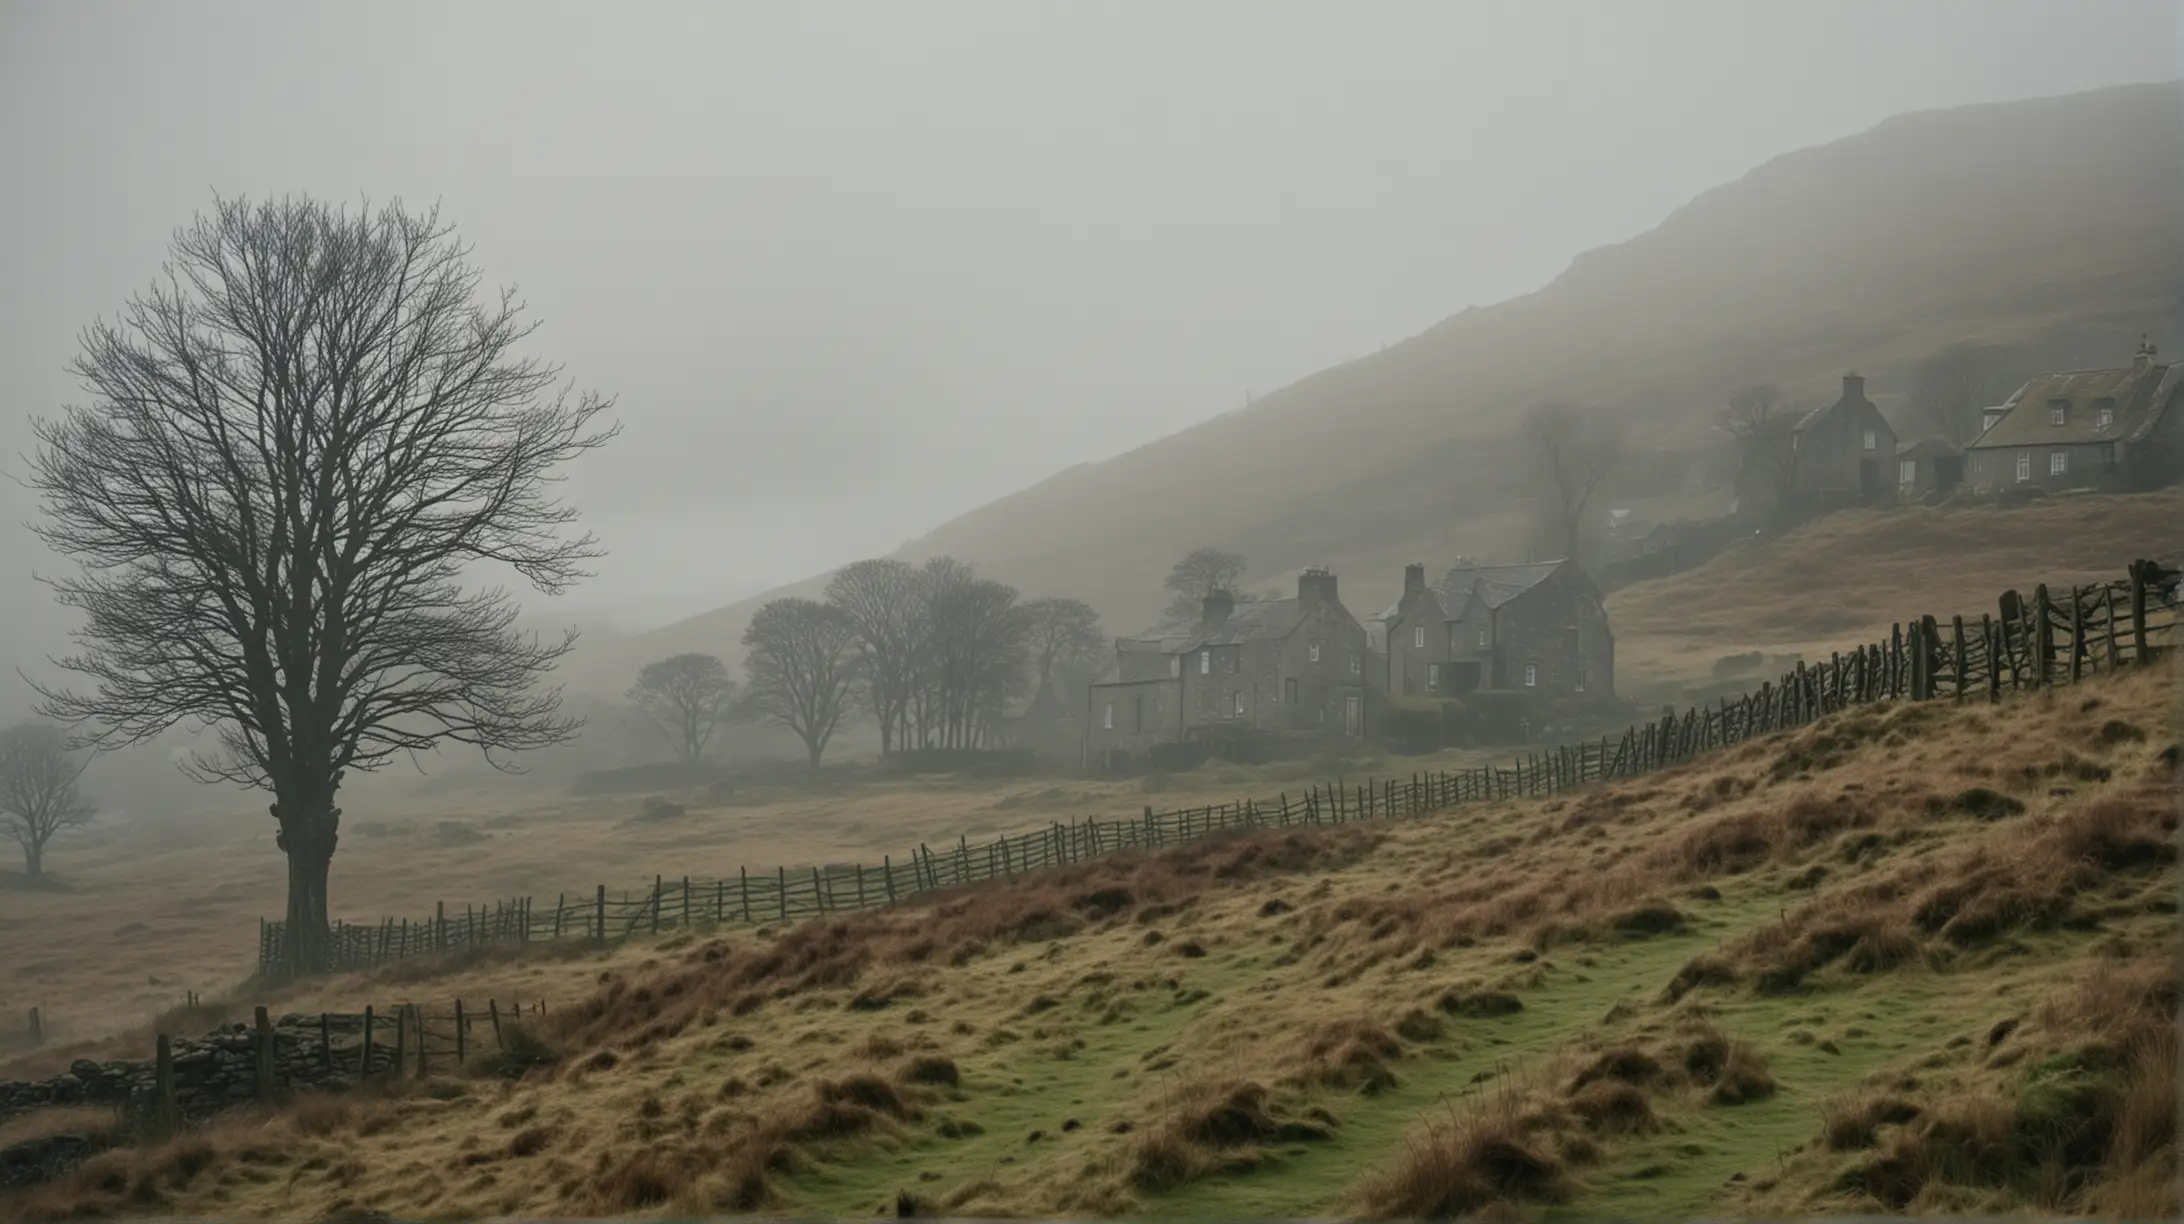 Eerie MistCovered Landscape of Rural Scotland Detective Sergeant Cora Lear Mystery Thriller Lookbook